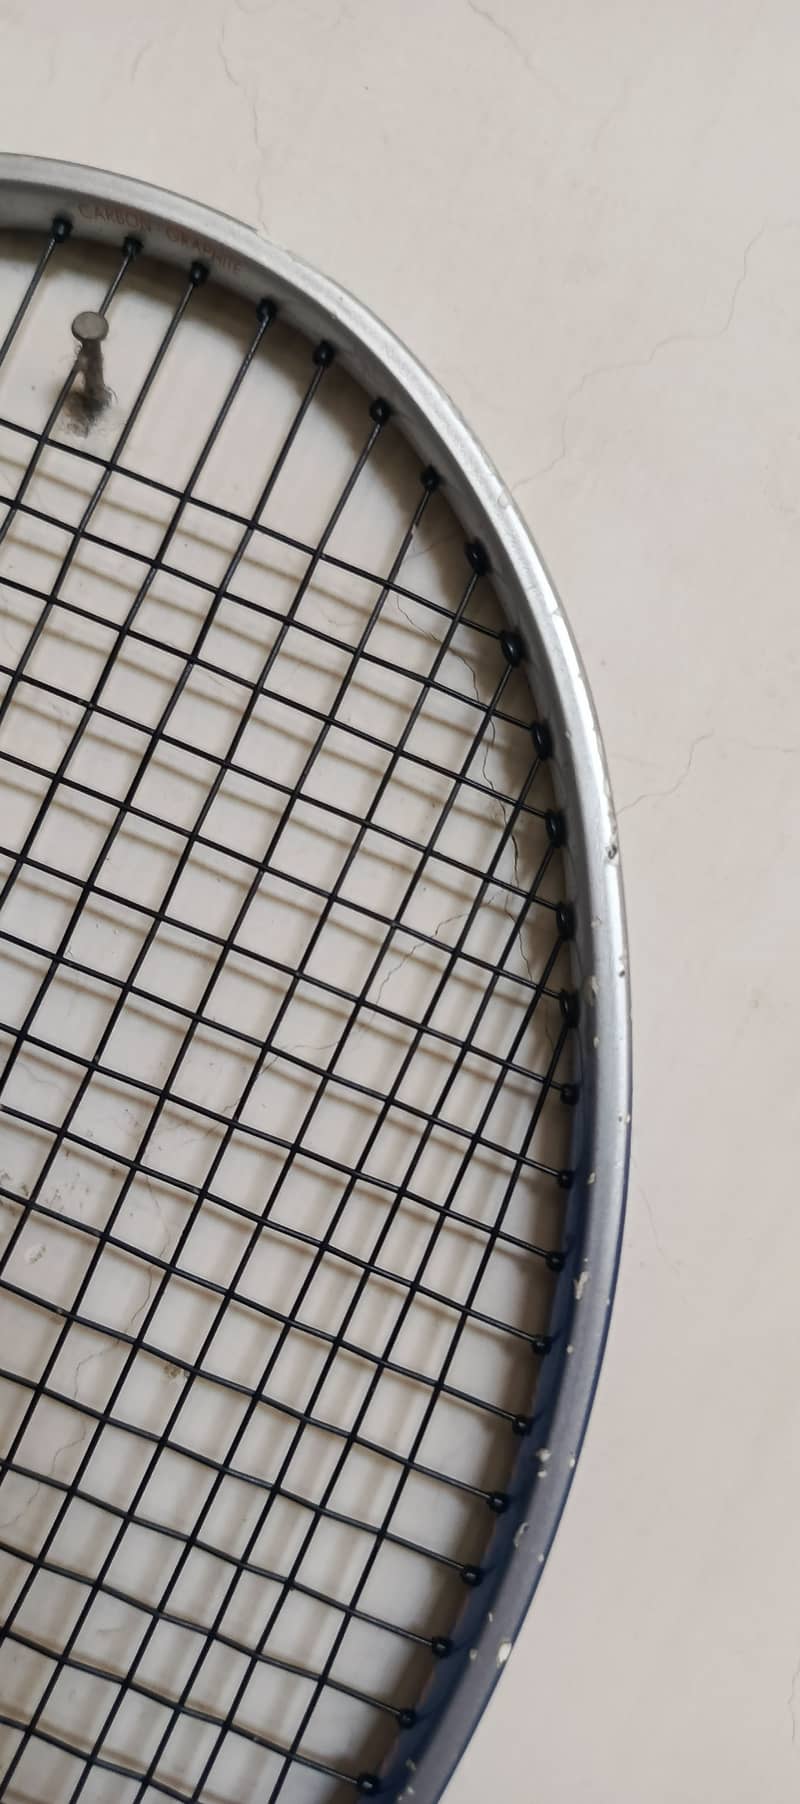 Badminton Racket | Hiqua 150 made in USA weight 84 tension 28 lbs 11